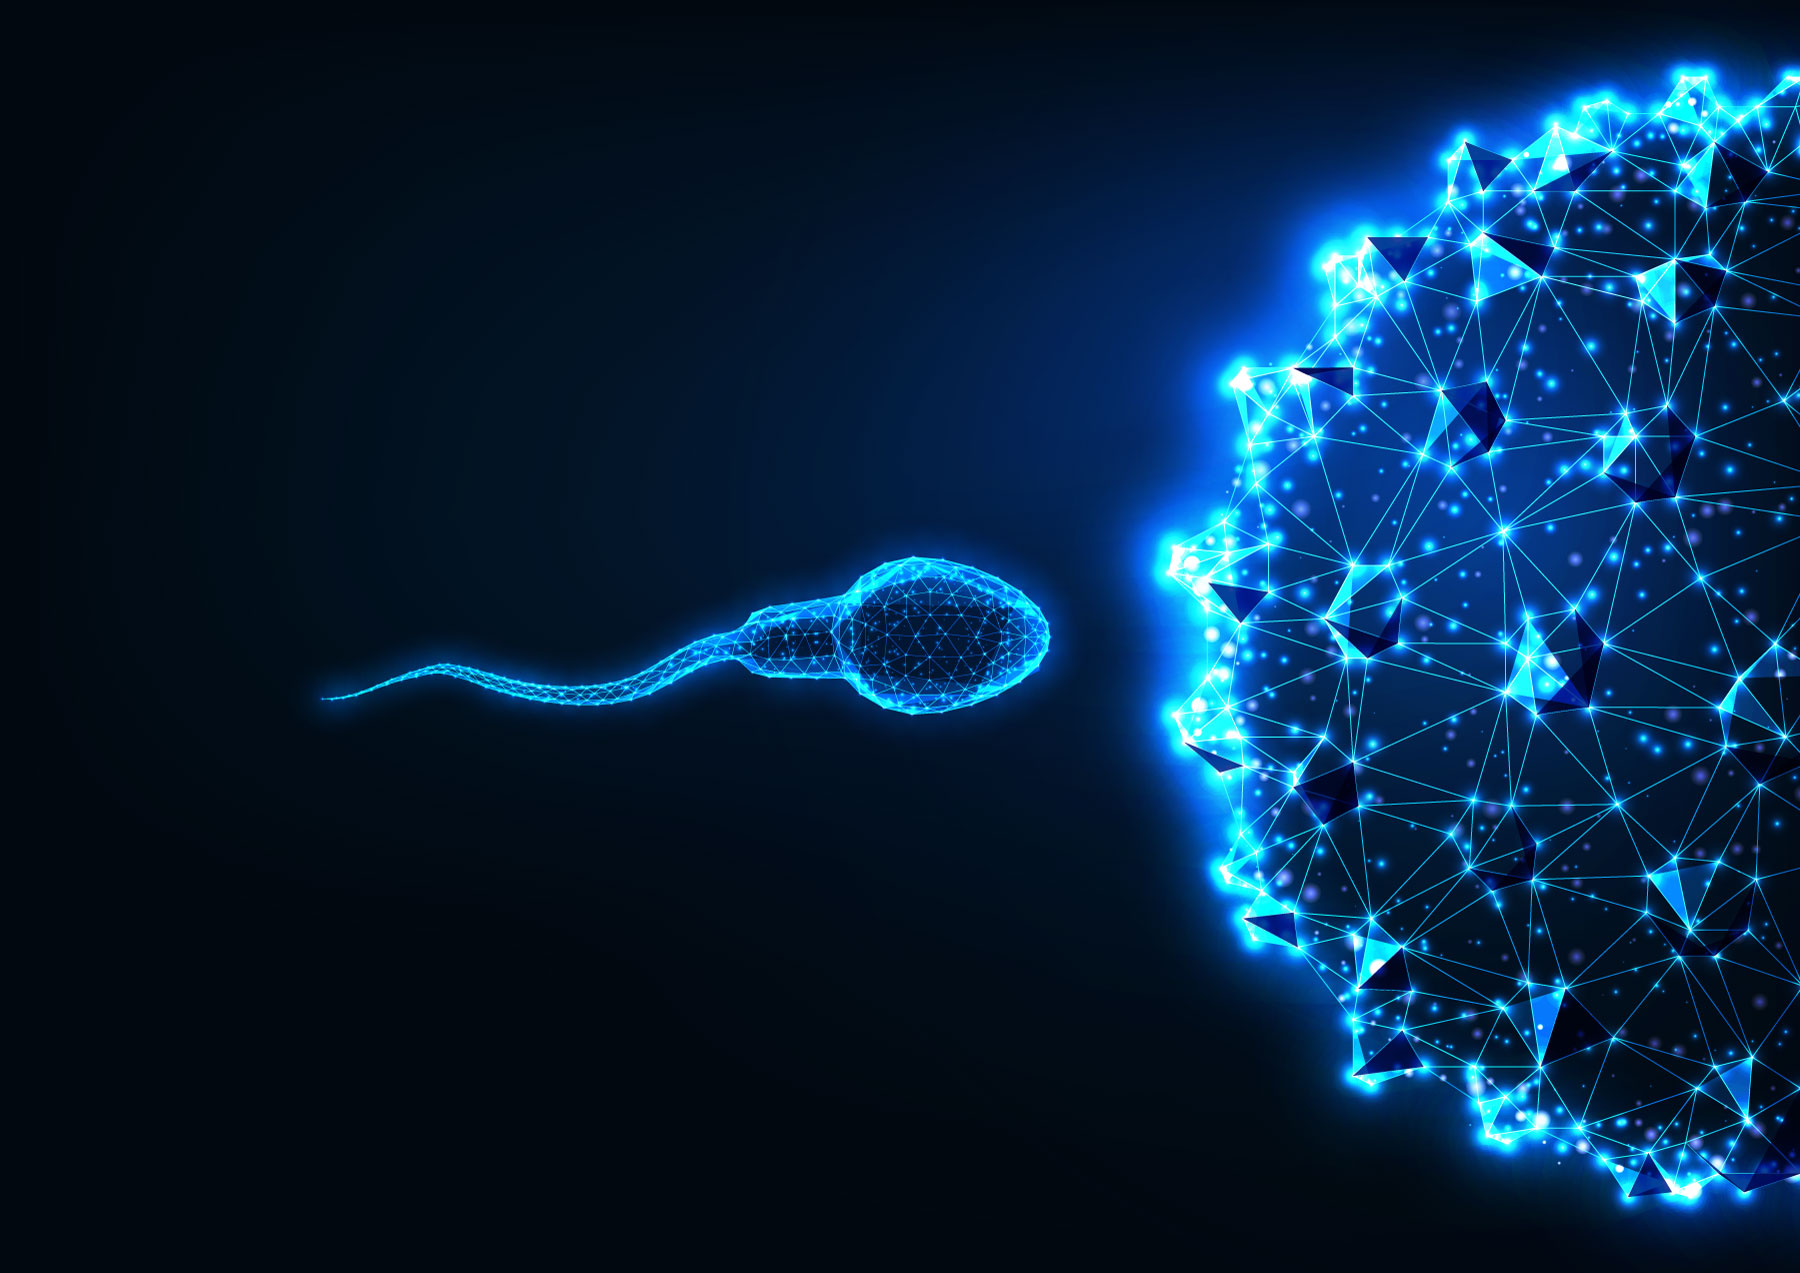 Stylized digital picture representing a sperm moments before fertilizing an egg.